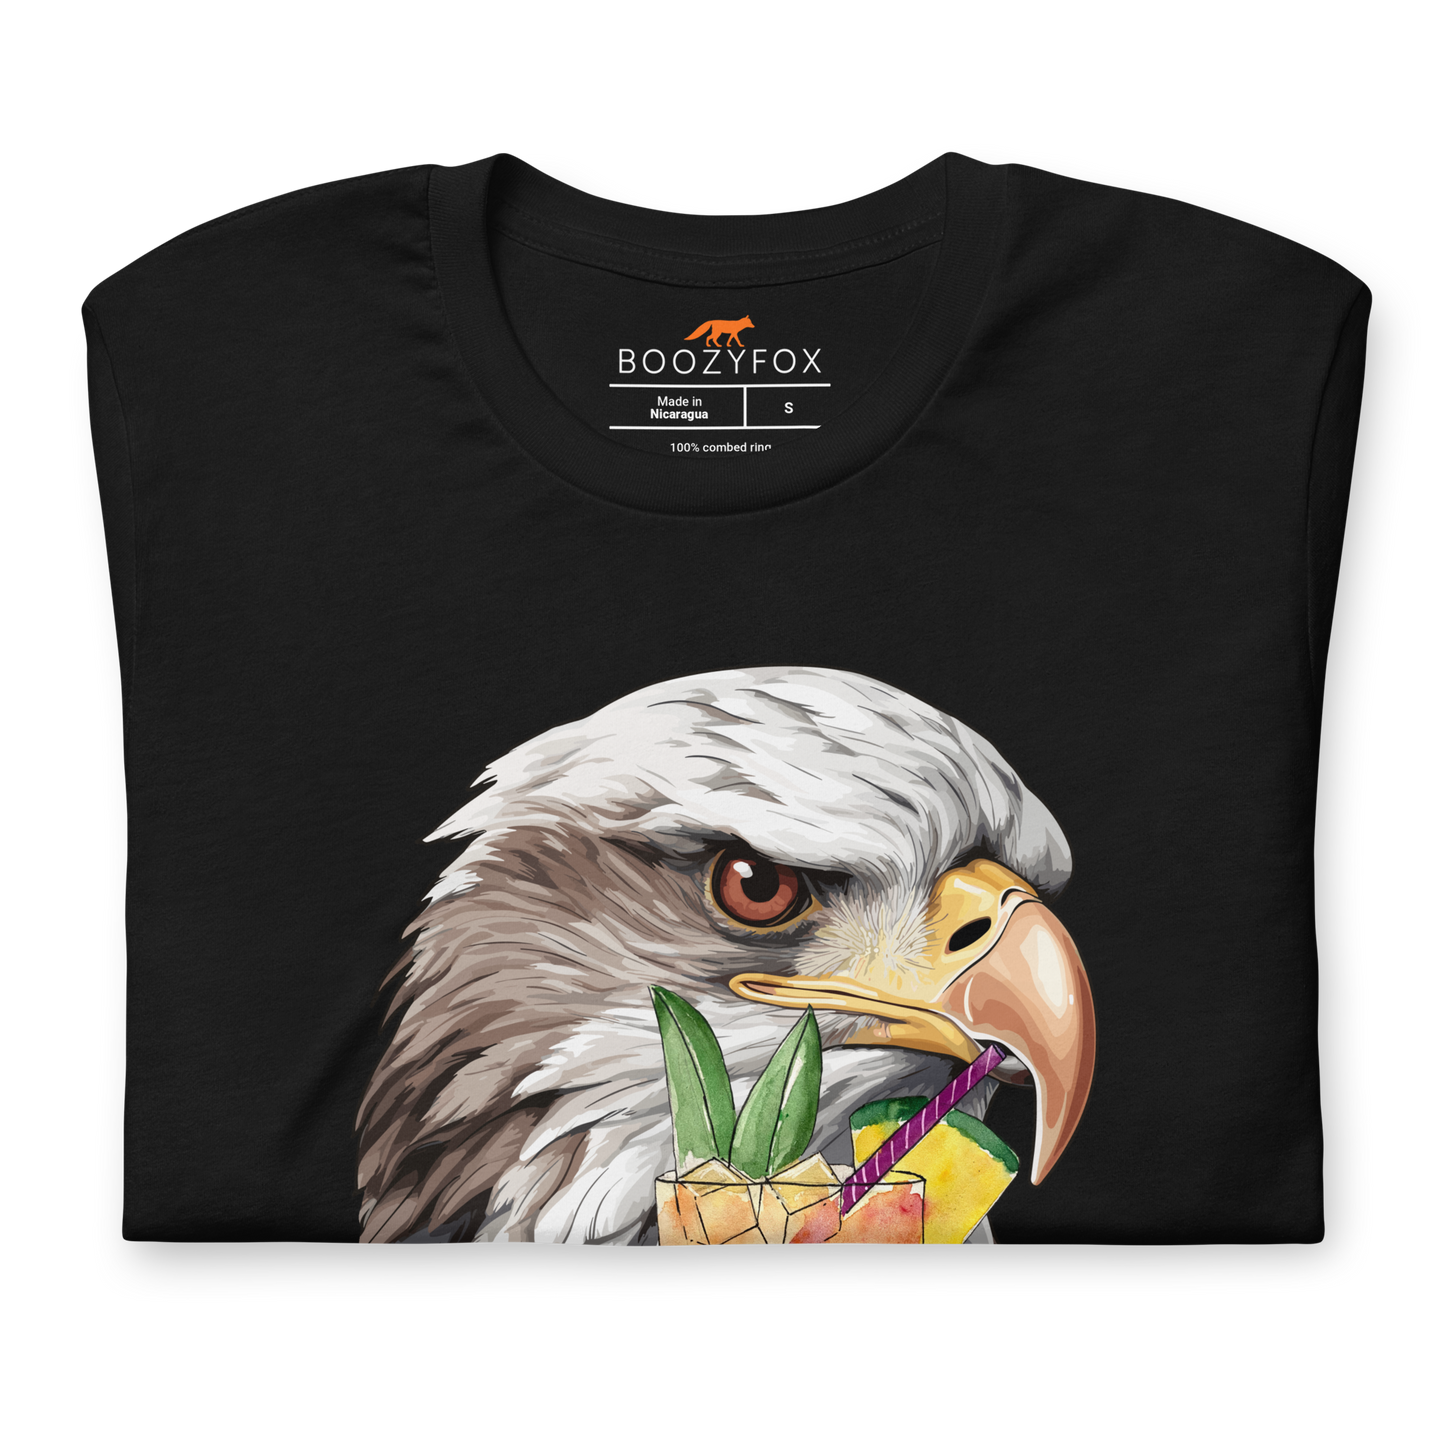 Front details of a Black Premium Eagle T-Shirt featuring an eye-catching I Am Eagle to Party graphic on the chest - Funny Graphic Eagle Tees - Boozy Fox